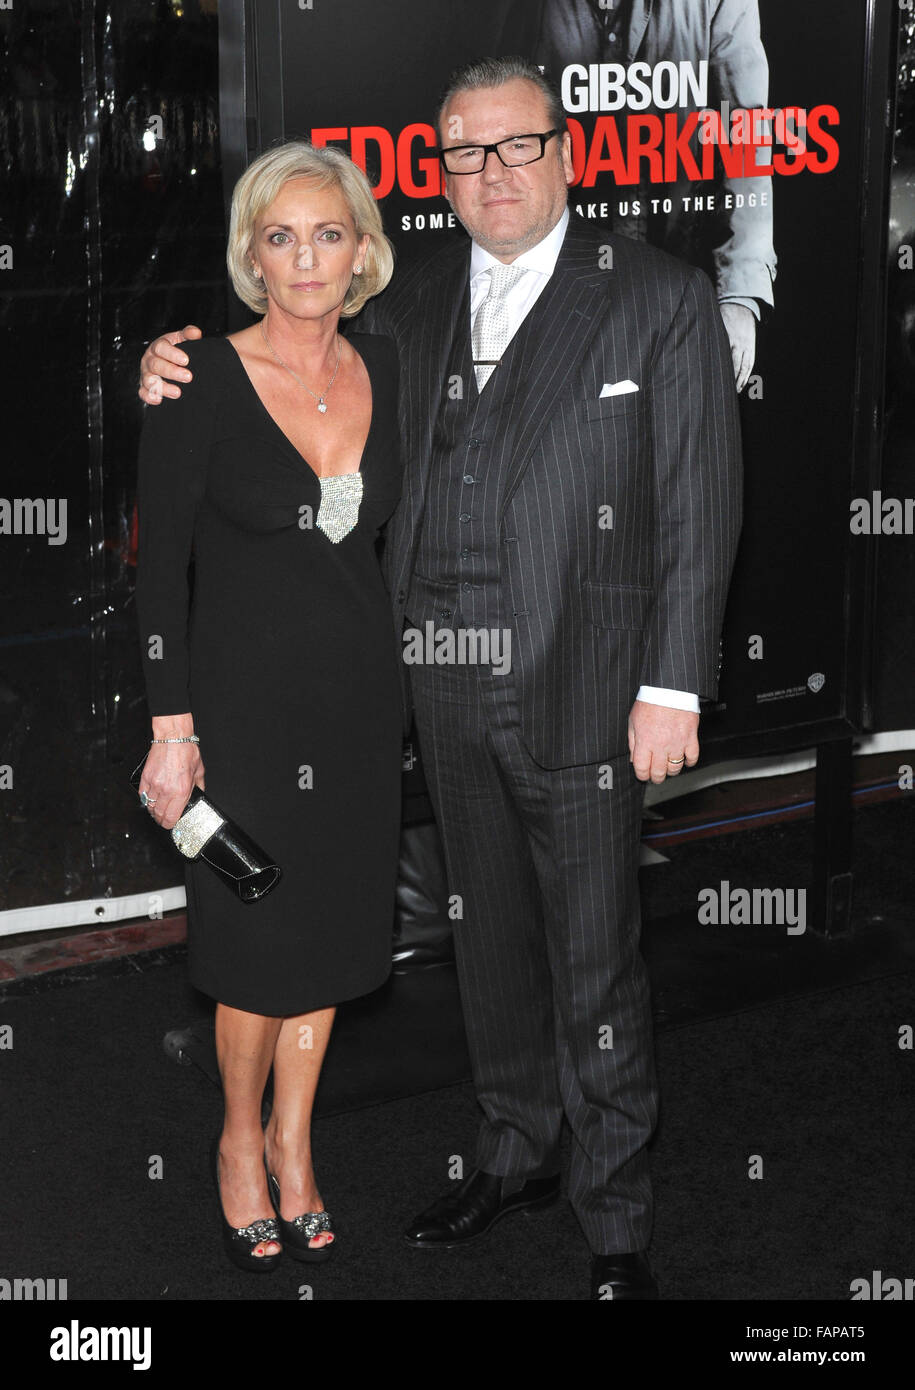 LOS ANGELES, CA - JANUARY 26, 2010: Ray Winstone & wife Elaine at the Los Angeles premiere of his new movie 'Edge of Darkness' at Grauman's Chinese Theatre, Hollywood. Stock Photo